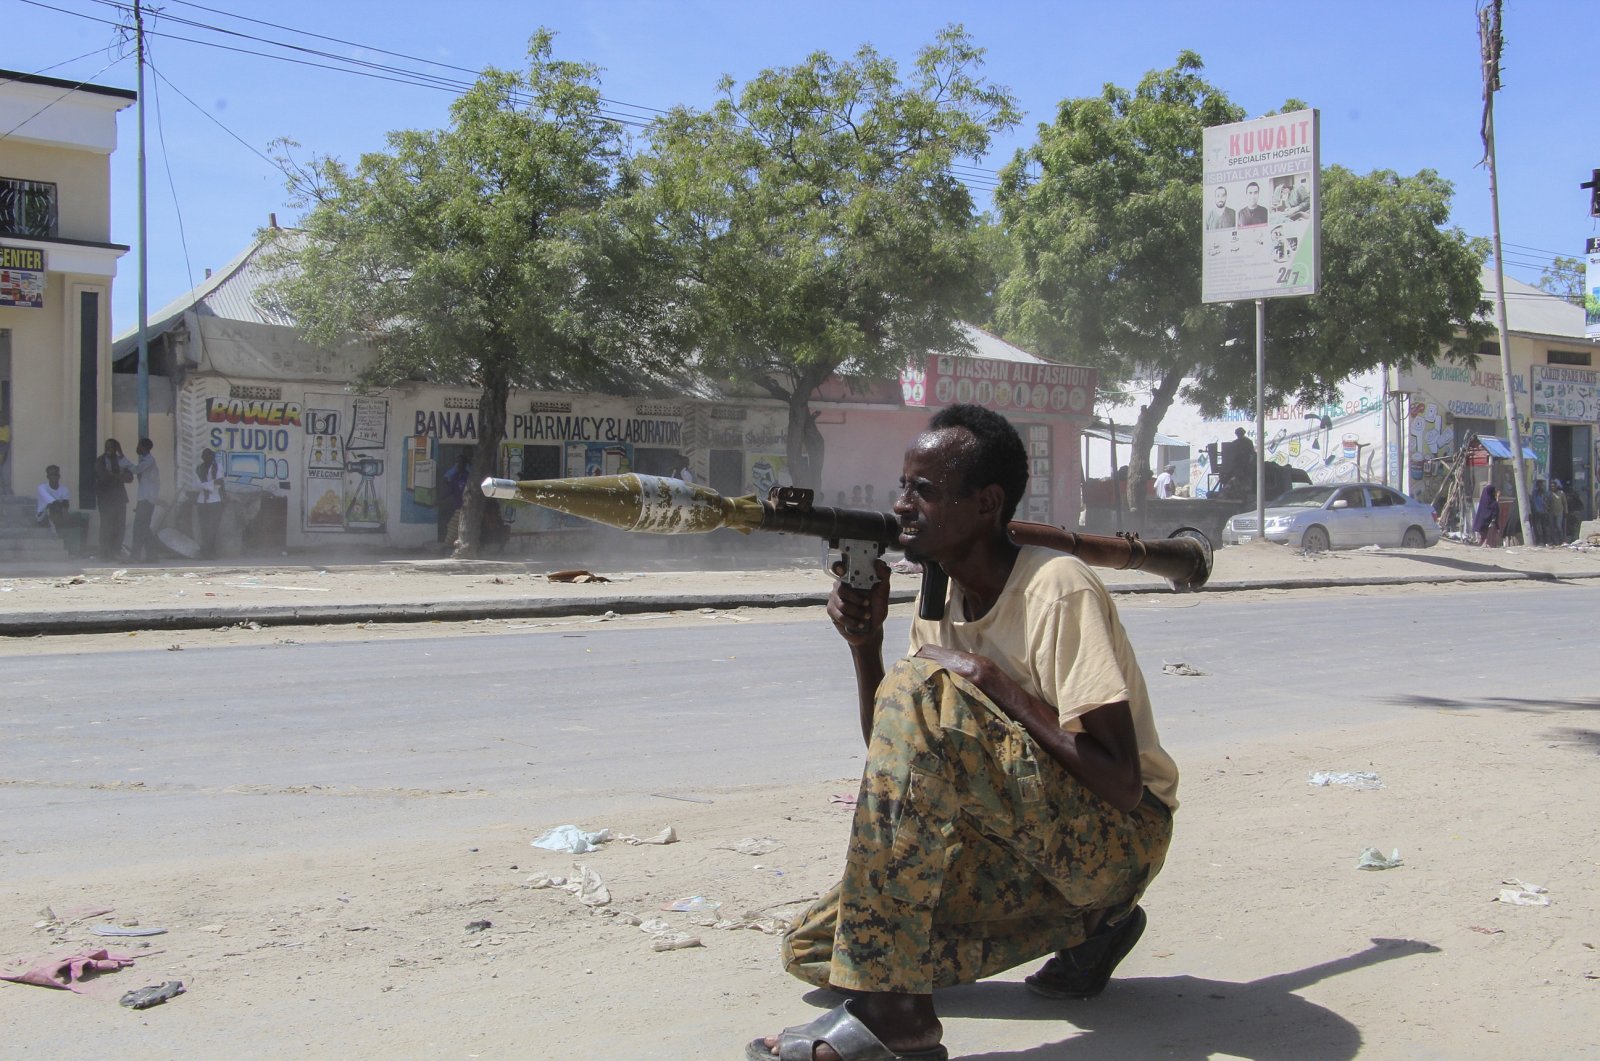 Former Somalia leaders say soldiers attacked his